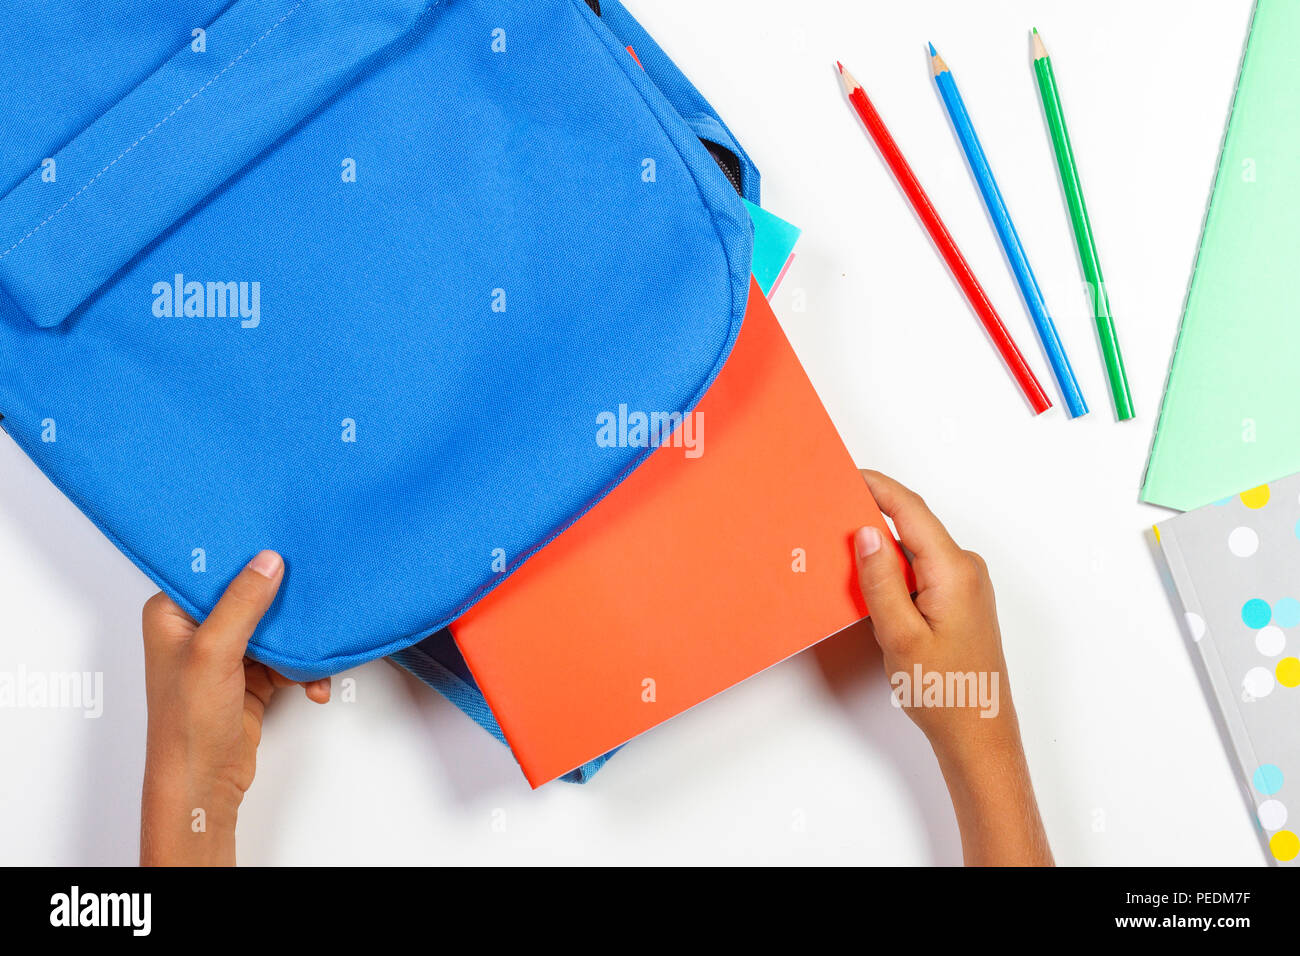 Back to school, education concept. Kid hands packing backpack and preparing for school. Top view Stock Photo